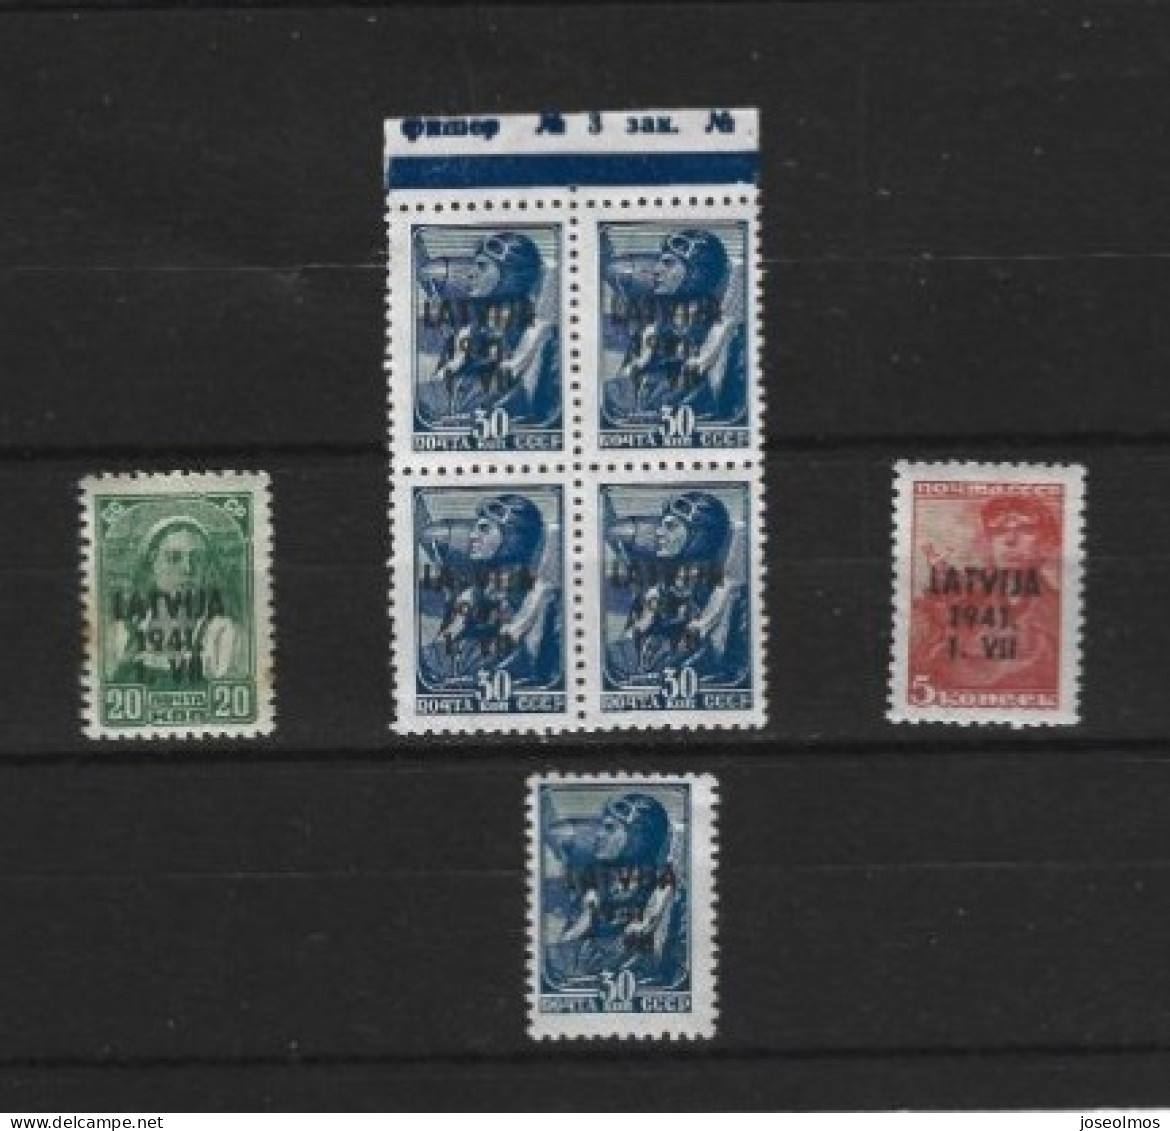 TIMBRES OCCUPATION LETTONIE NEUF**/* ANNEE 1941 N° 1-4-5 Y&T - Neufs